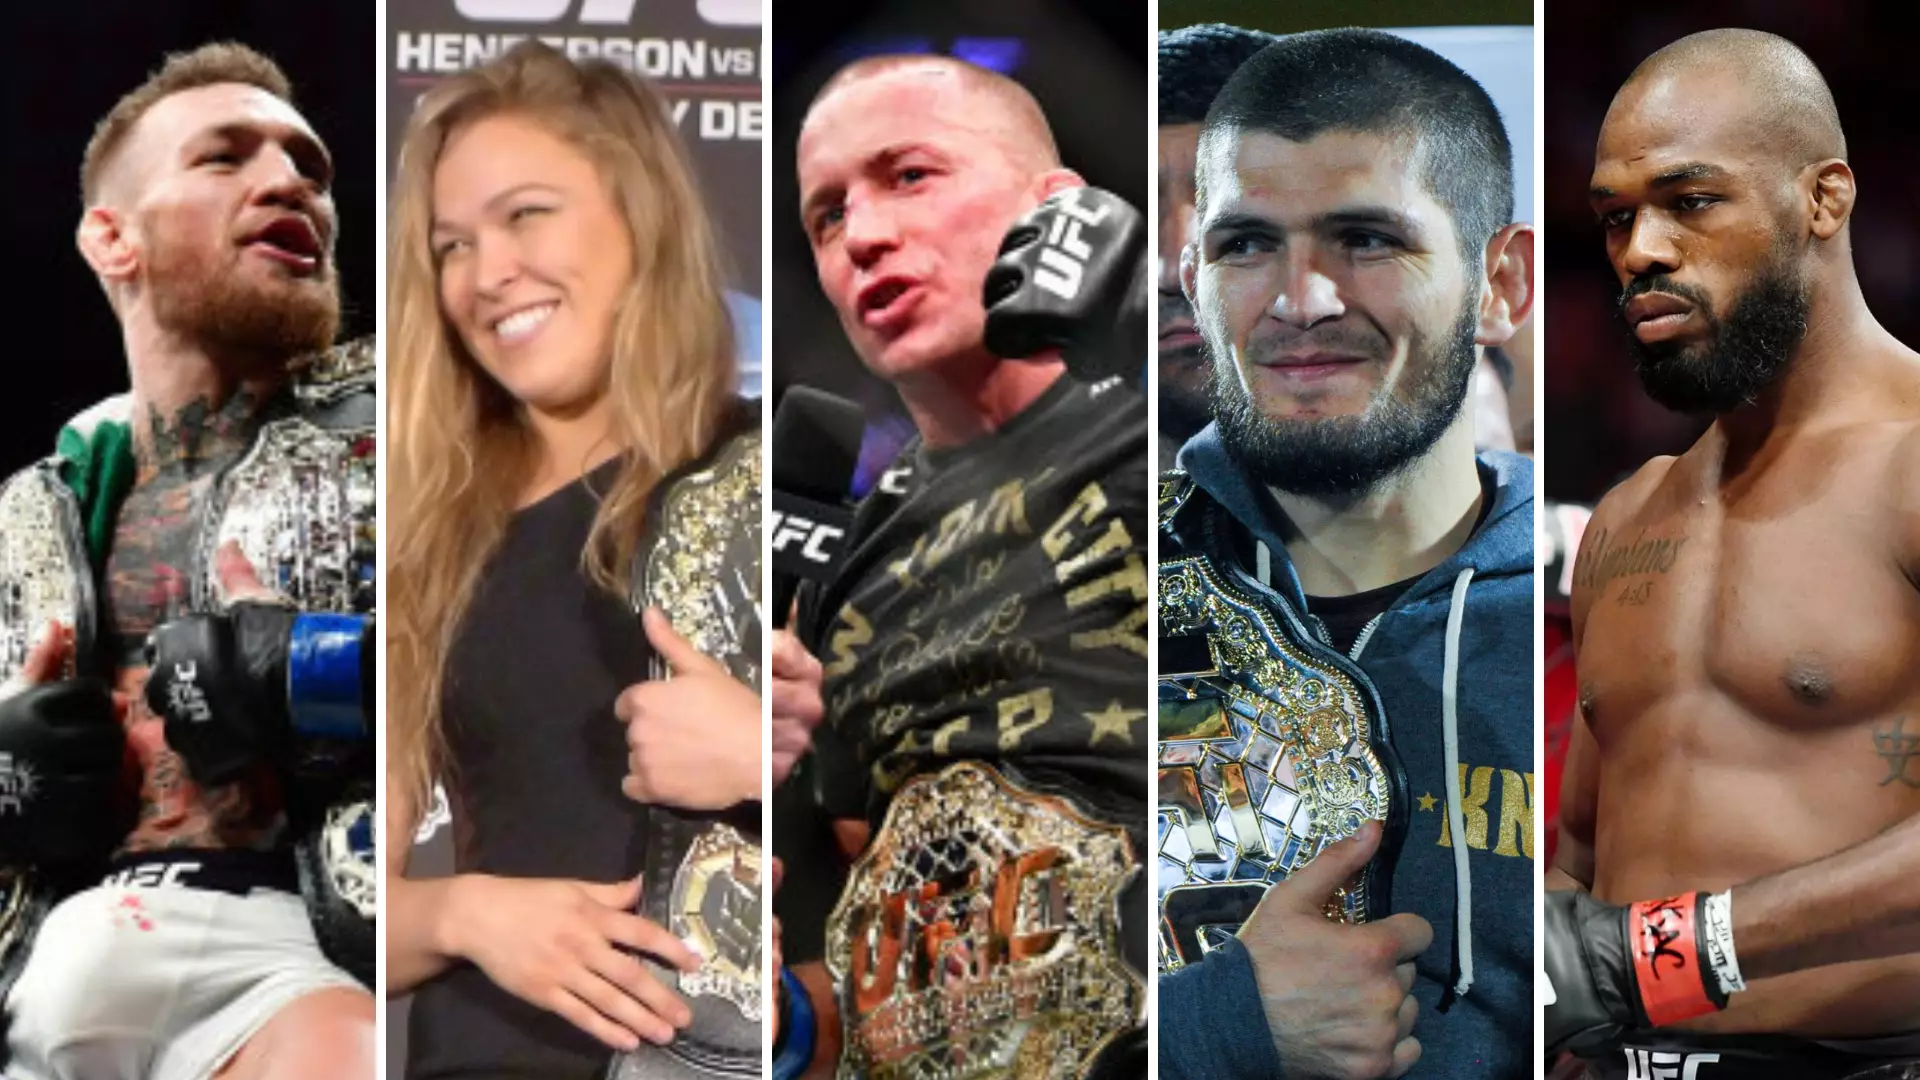 20 Highest-Paid UFC Fighters